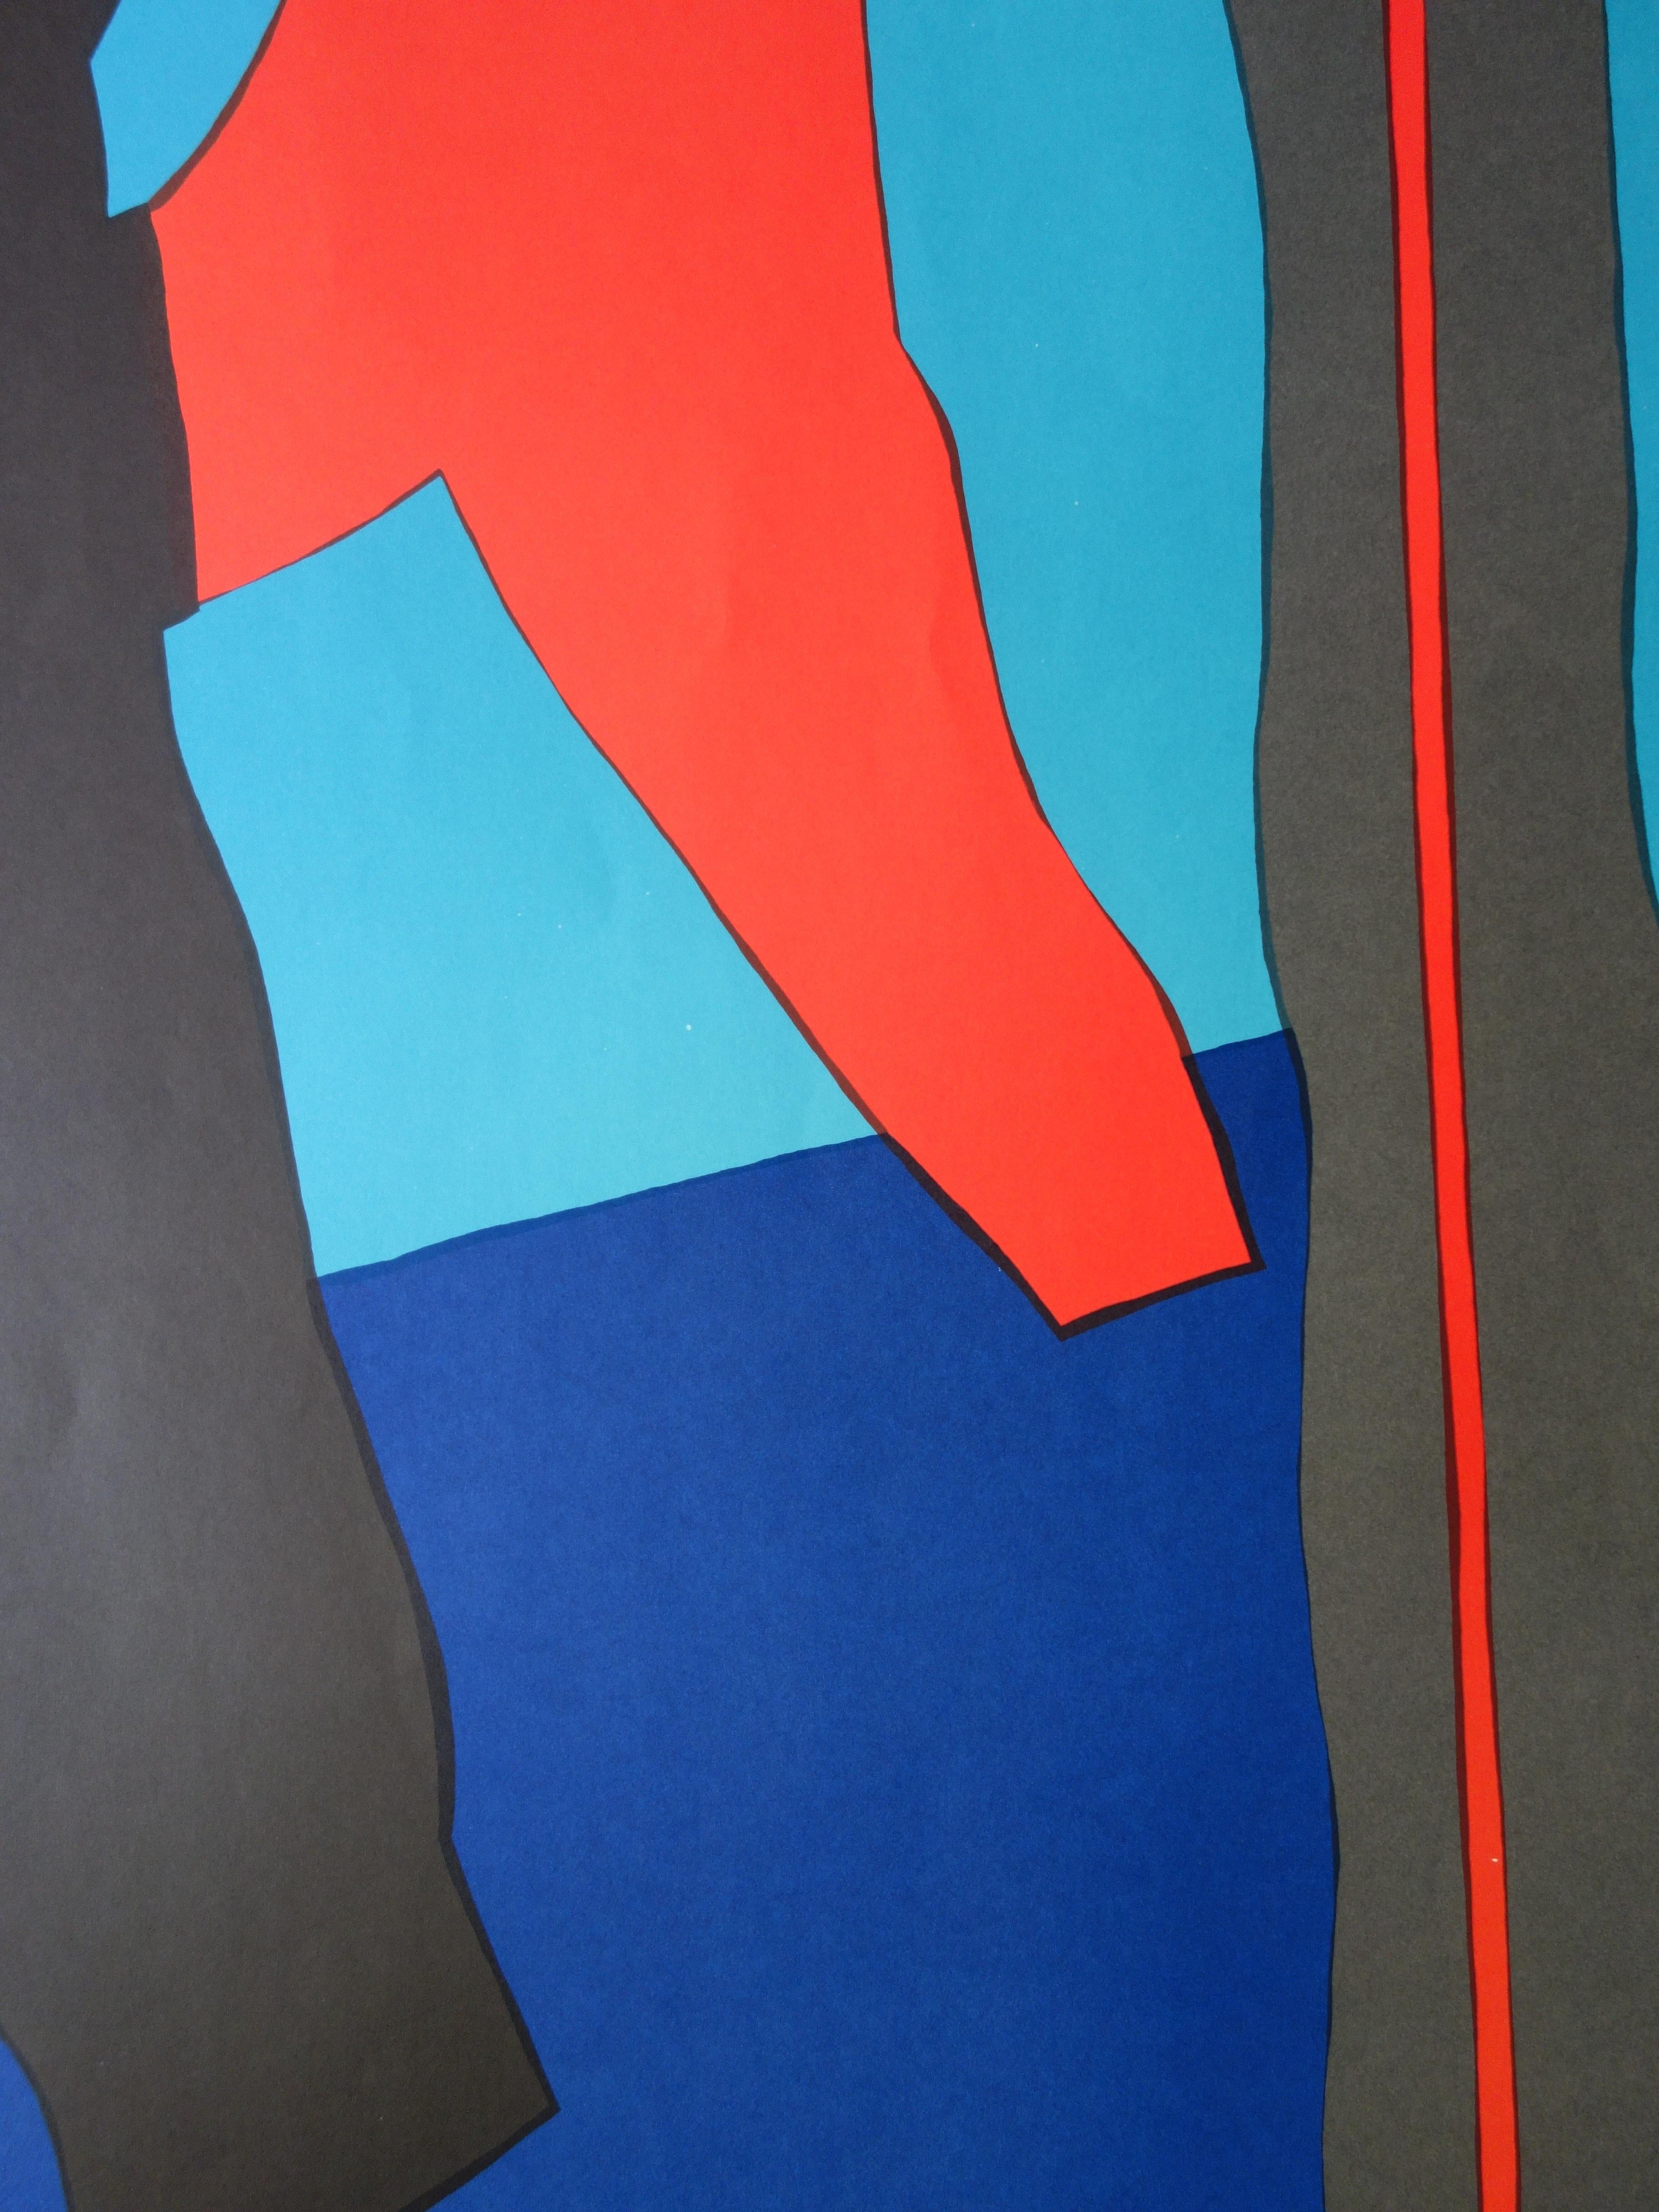 Fritz WINTER
Abstract Composition

Lithograph
Signature printed in the plate
On heavy paper 101 x 64 cm (c. 40 x 26 inch)
Made for the Olympic Games in Munich, 1972

Excellent condition